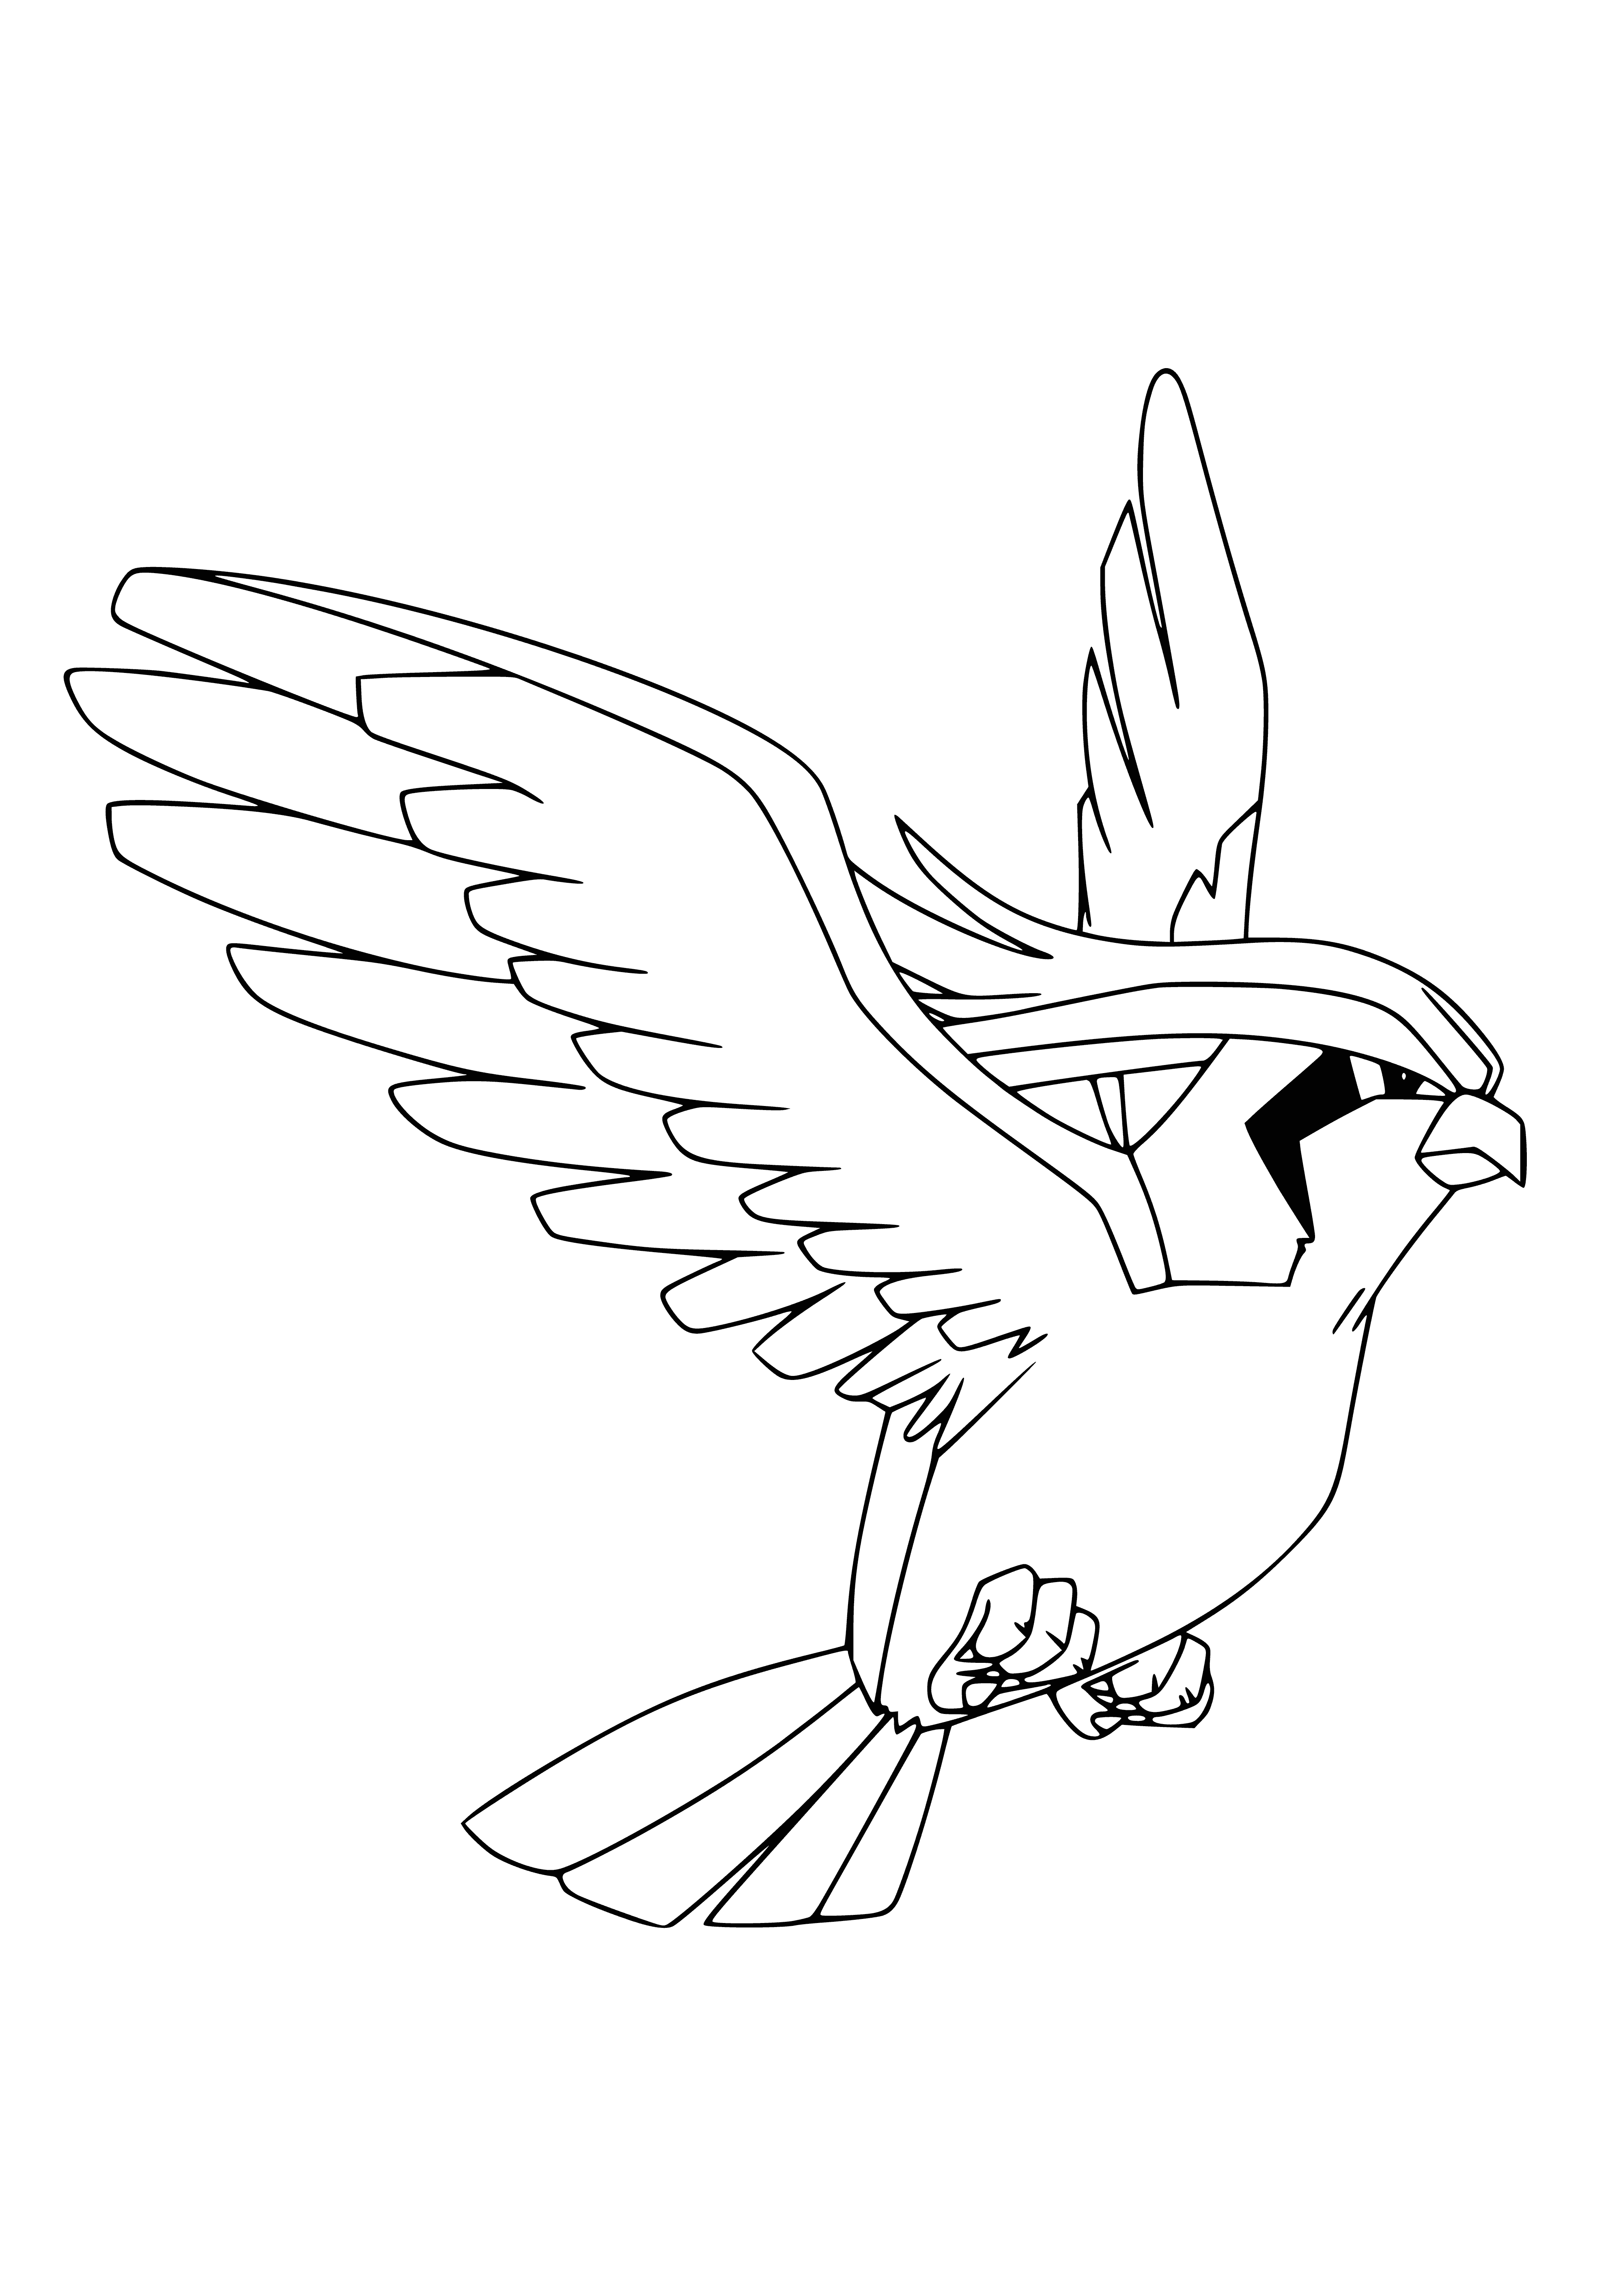 coloring page: Huge, hawk-like Pokémon with blue body, red breast, white head & black crest. Long beak & tail.